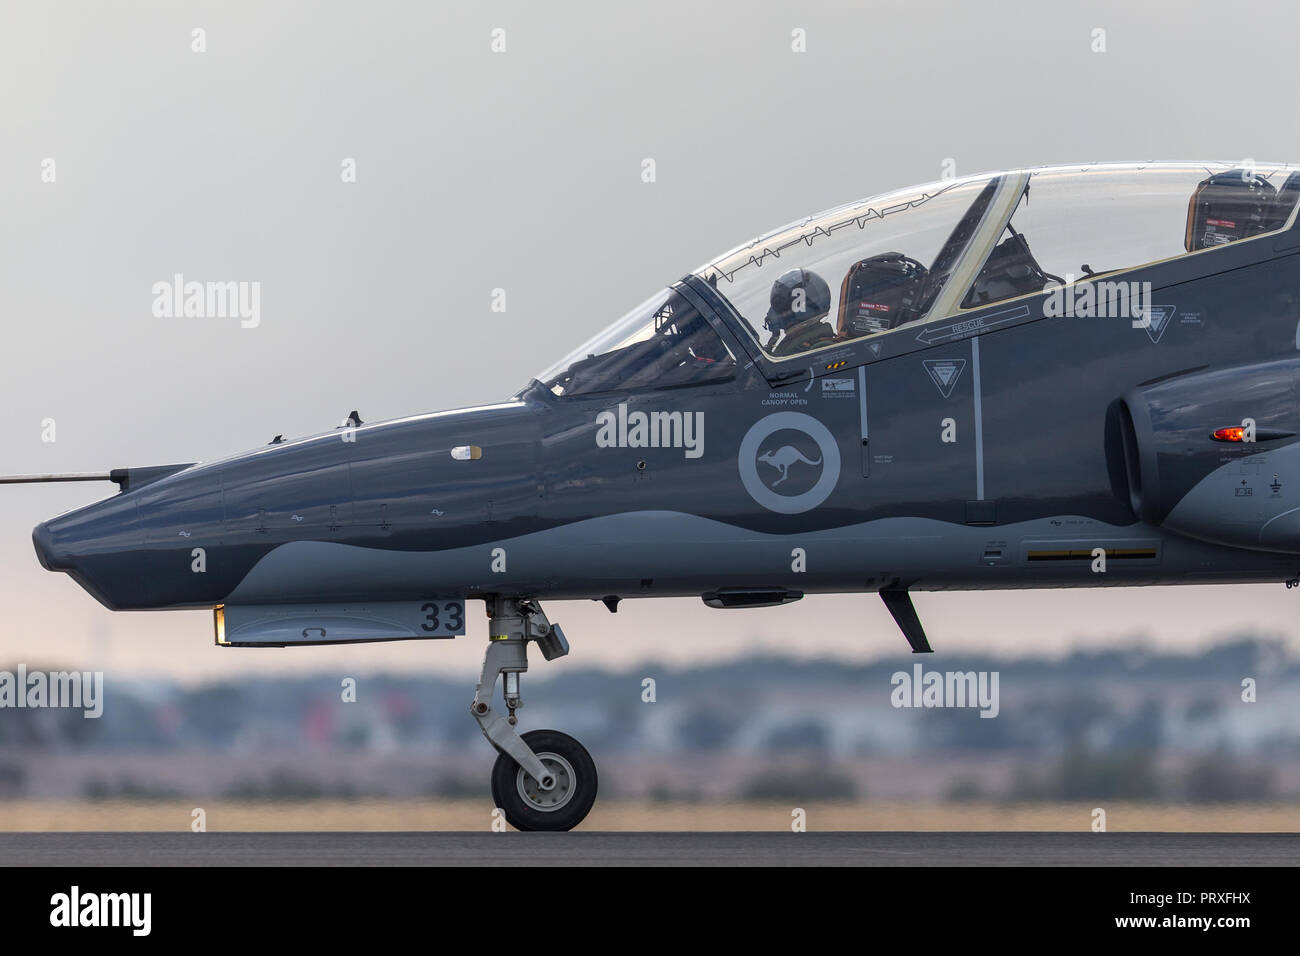 Royal Australian Air Force (RAAF) BAE Hawk 127 lead in fighter trainer aircraft A27-33. Stock Photo